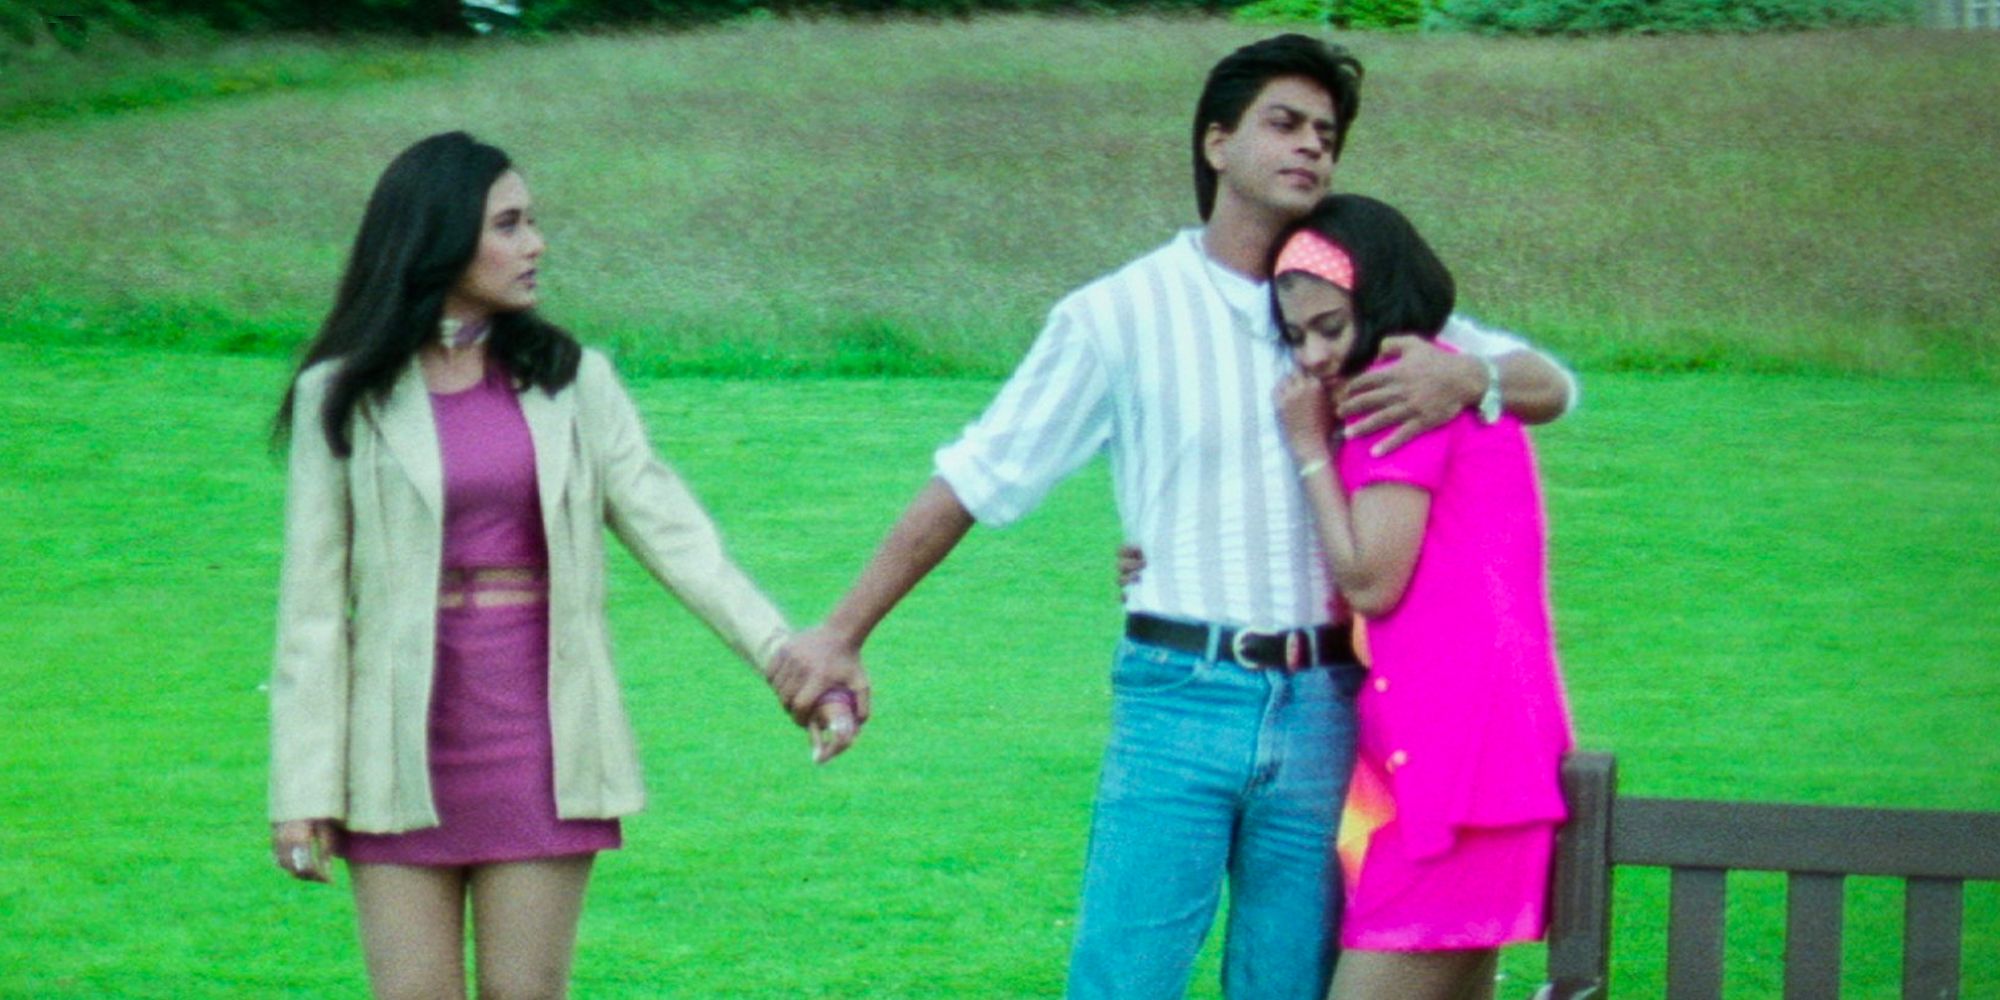 Shah Rukh Khan with a woman and girl in a field in kuch-kuch-hota-hai